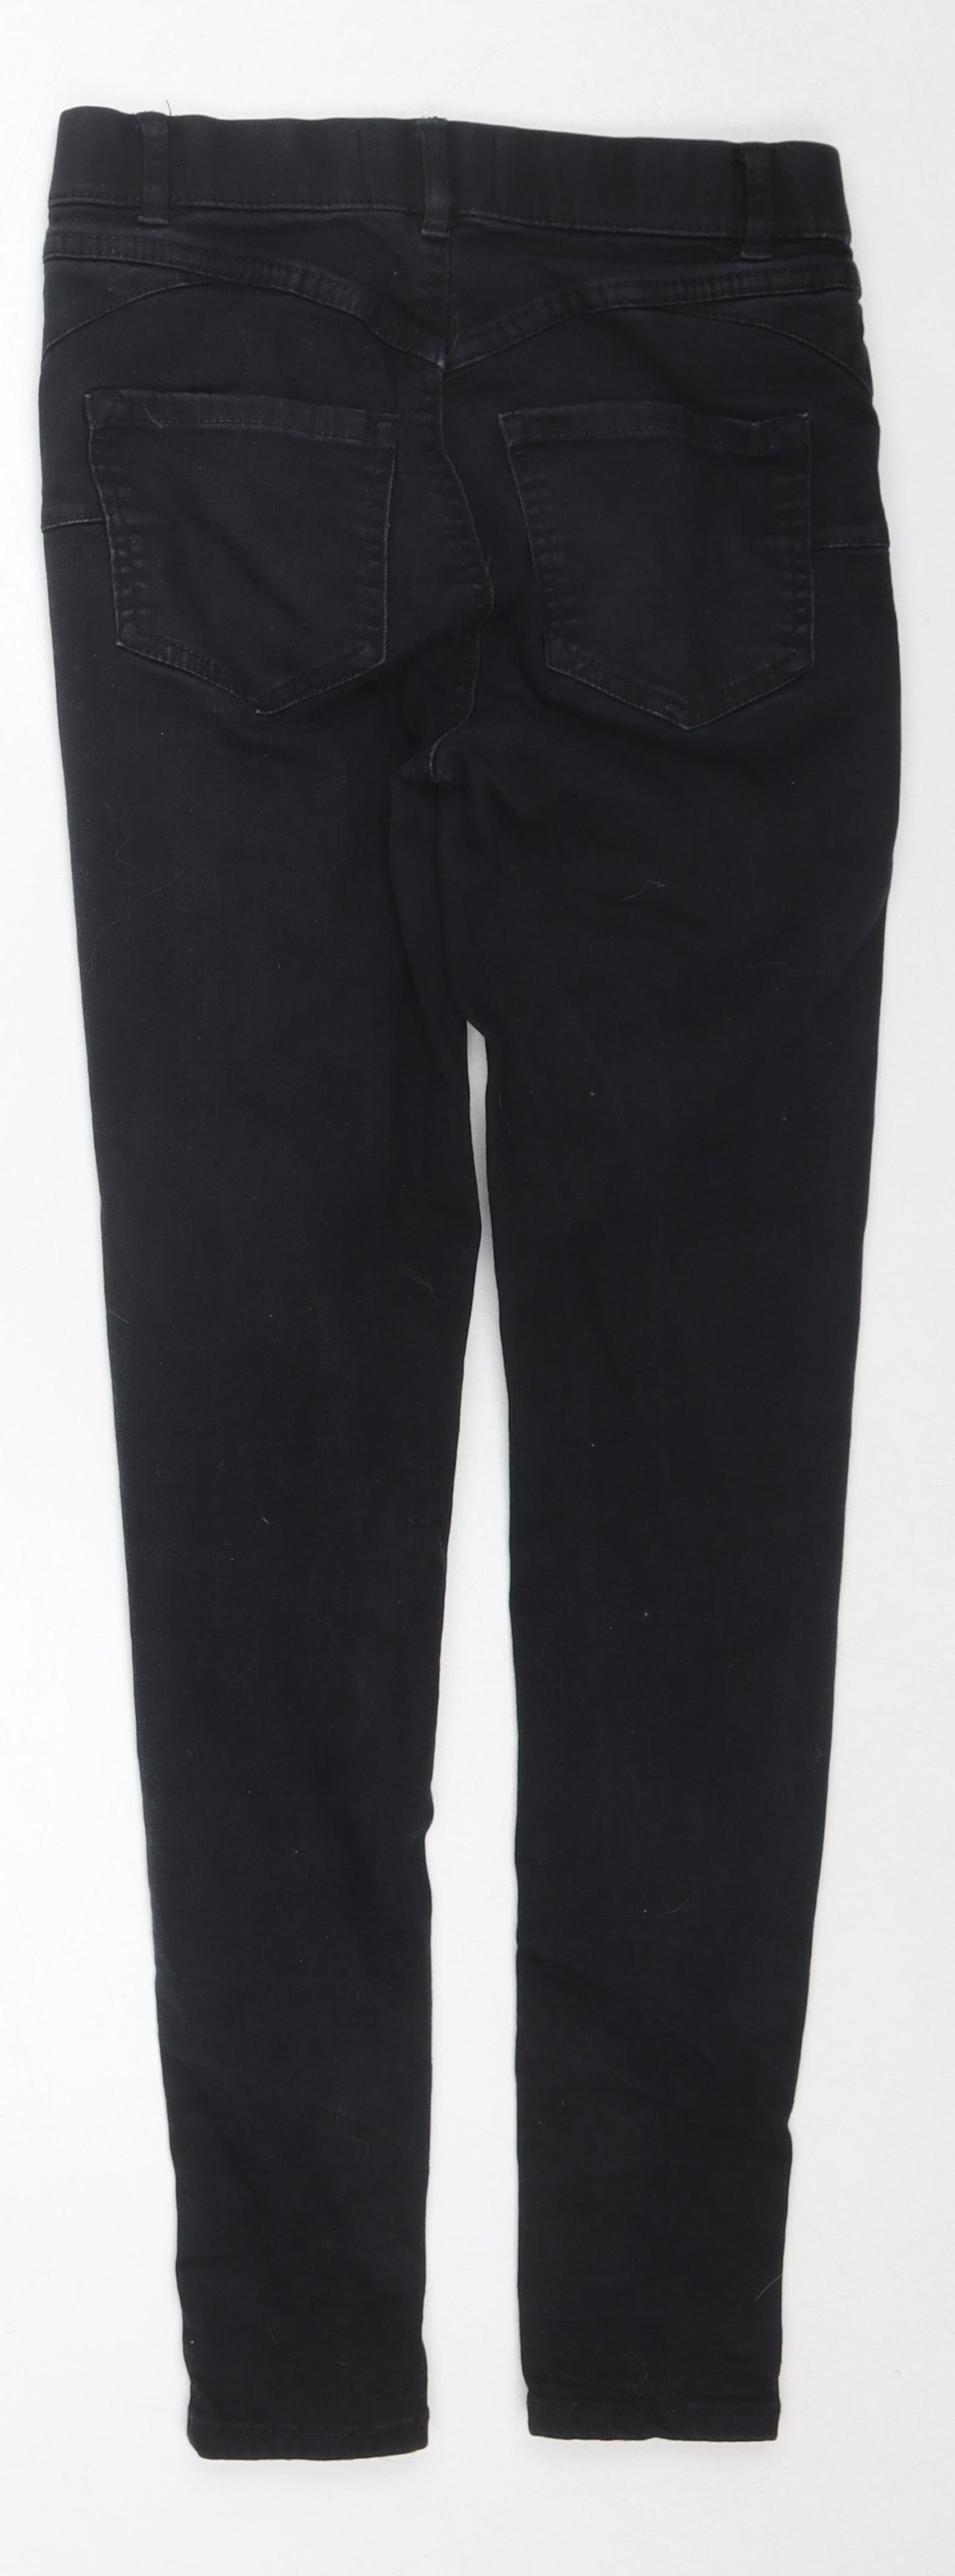 New Look Womens Black Cotton Jegging Jeans Size 8 L26 in Regular Zip